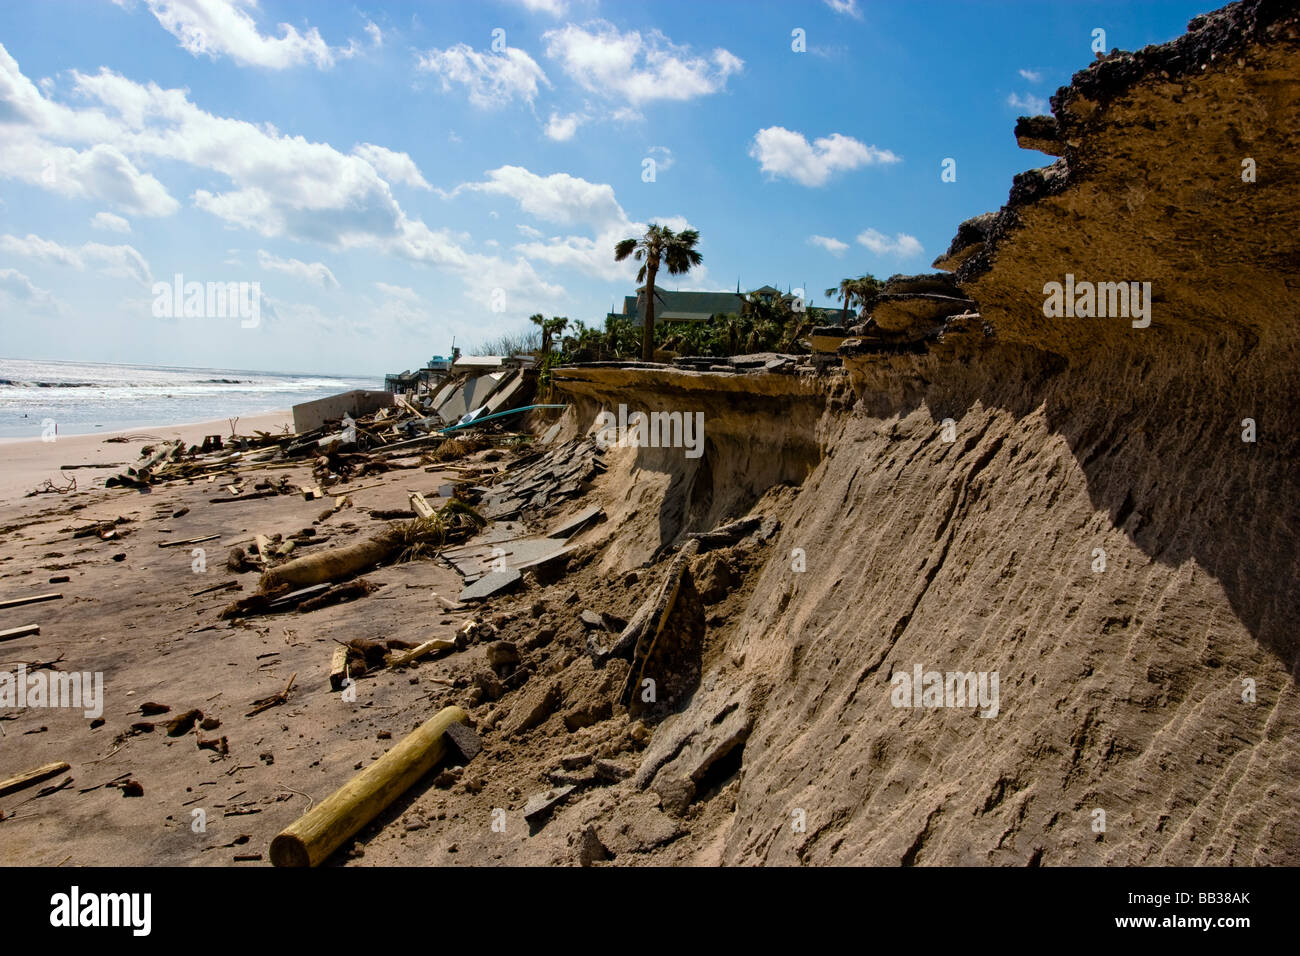 Hurricane Jeane caused enormous erosion along the coast of Vero Beach, Florida in 2004. Here Stock Photo